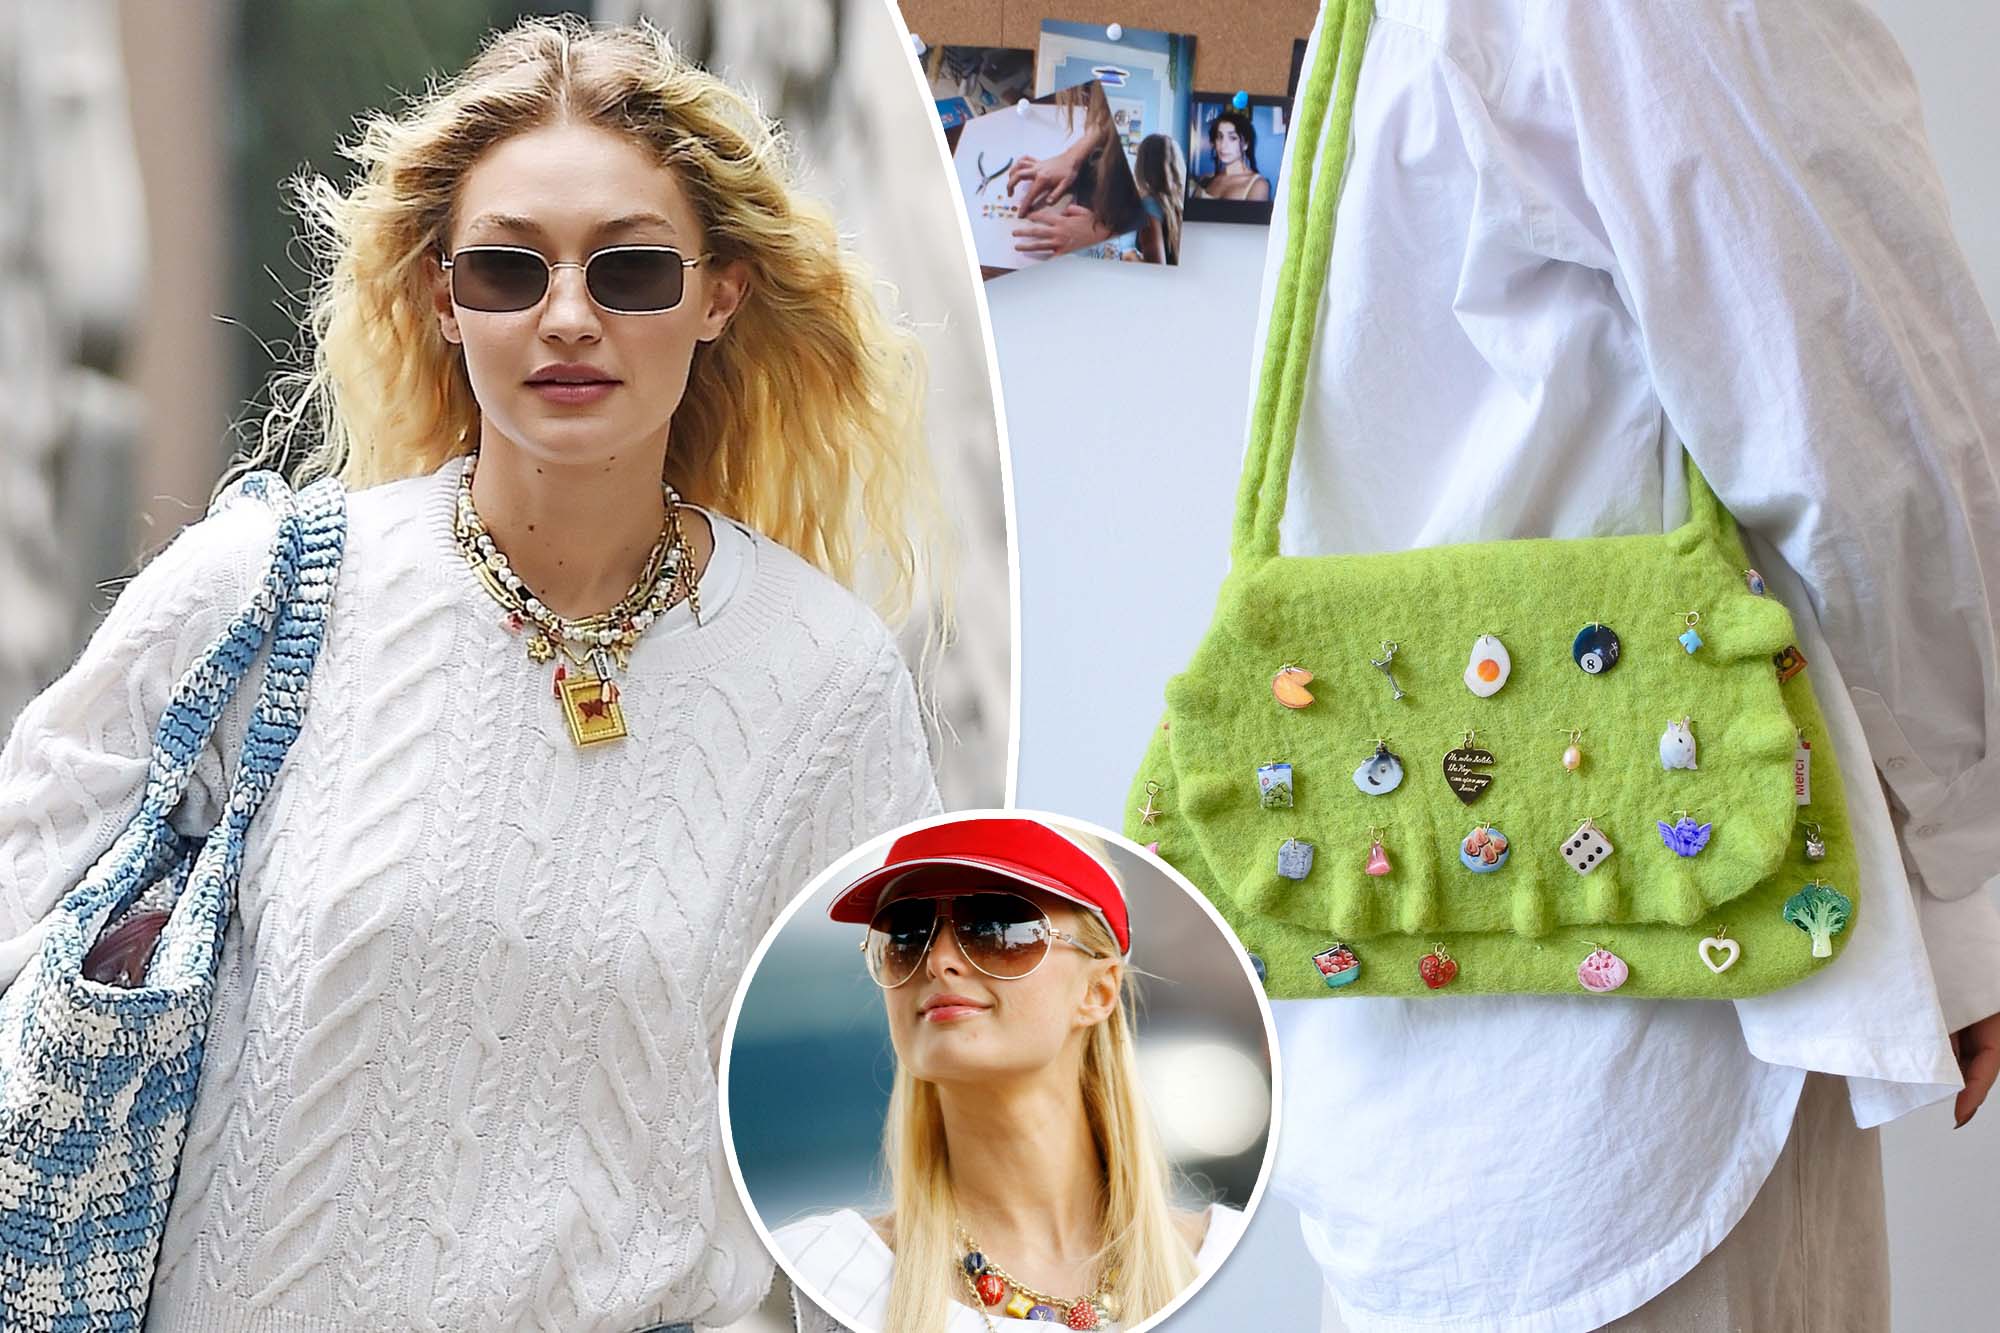 This charming trend is reviving a popular early aughts accessory